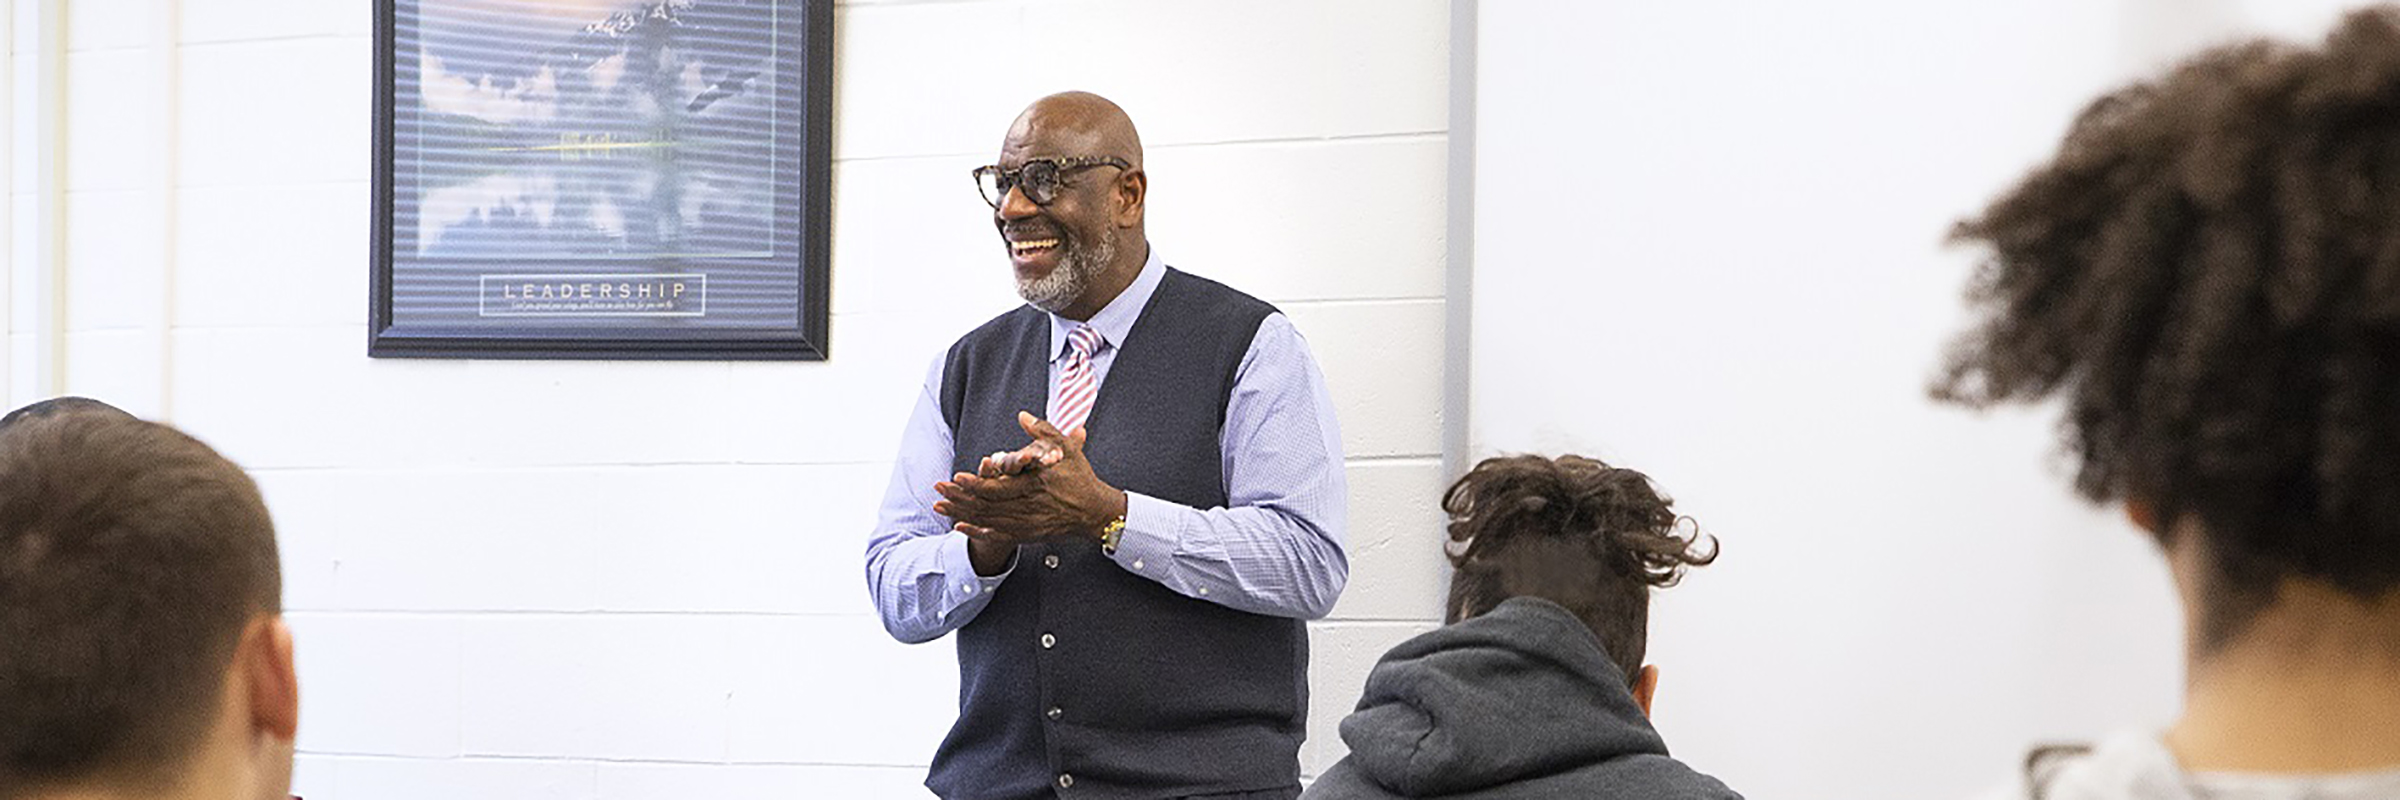 black man teacher smiling in front of classroom